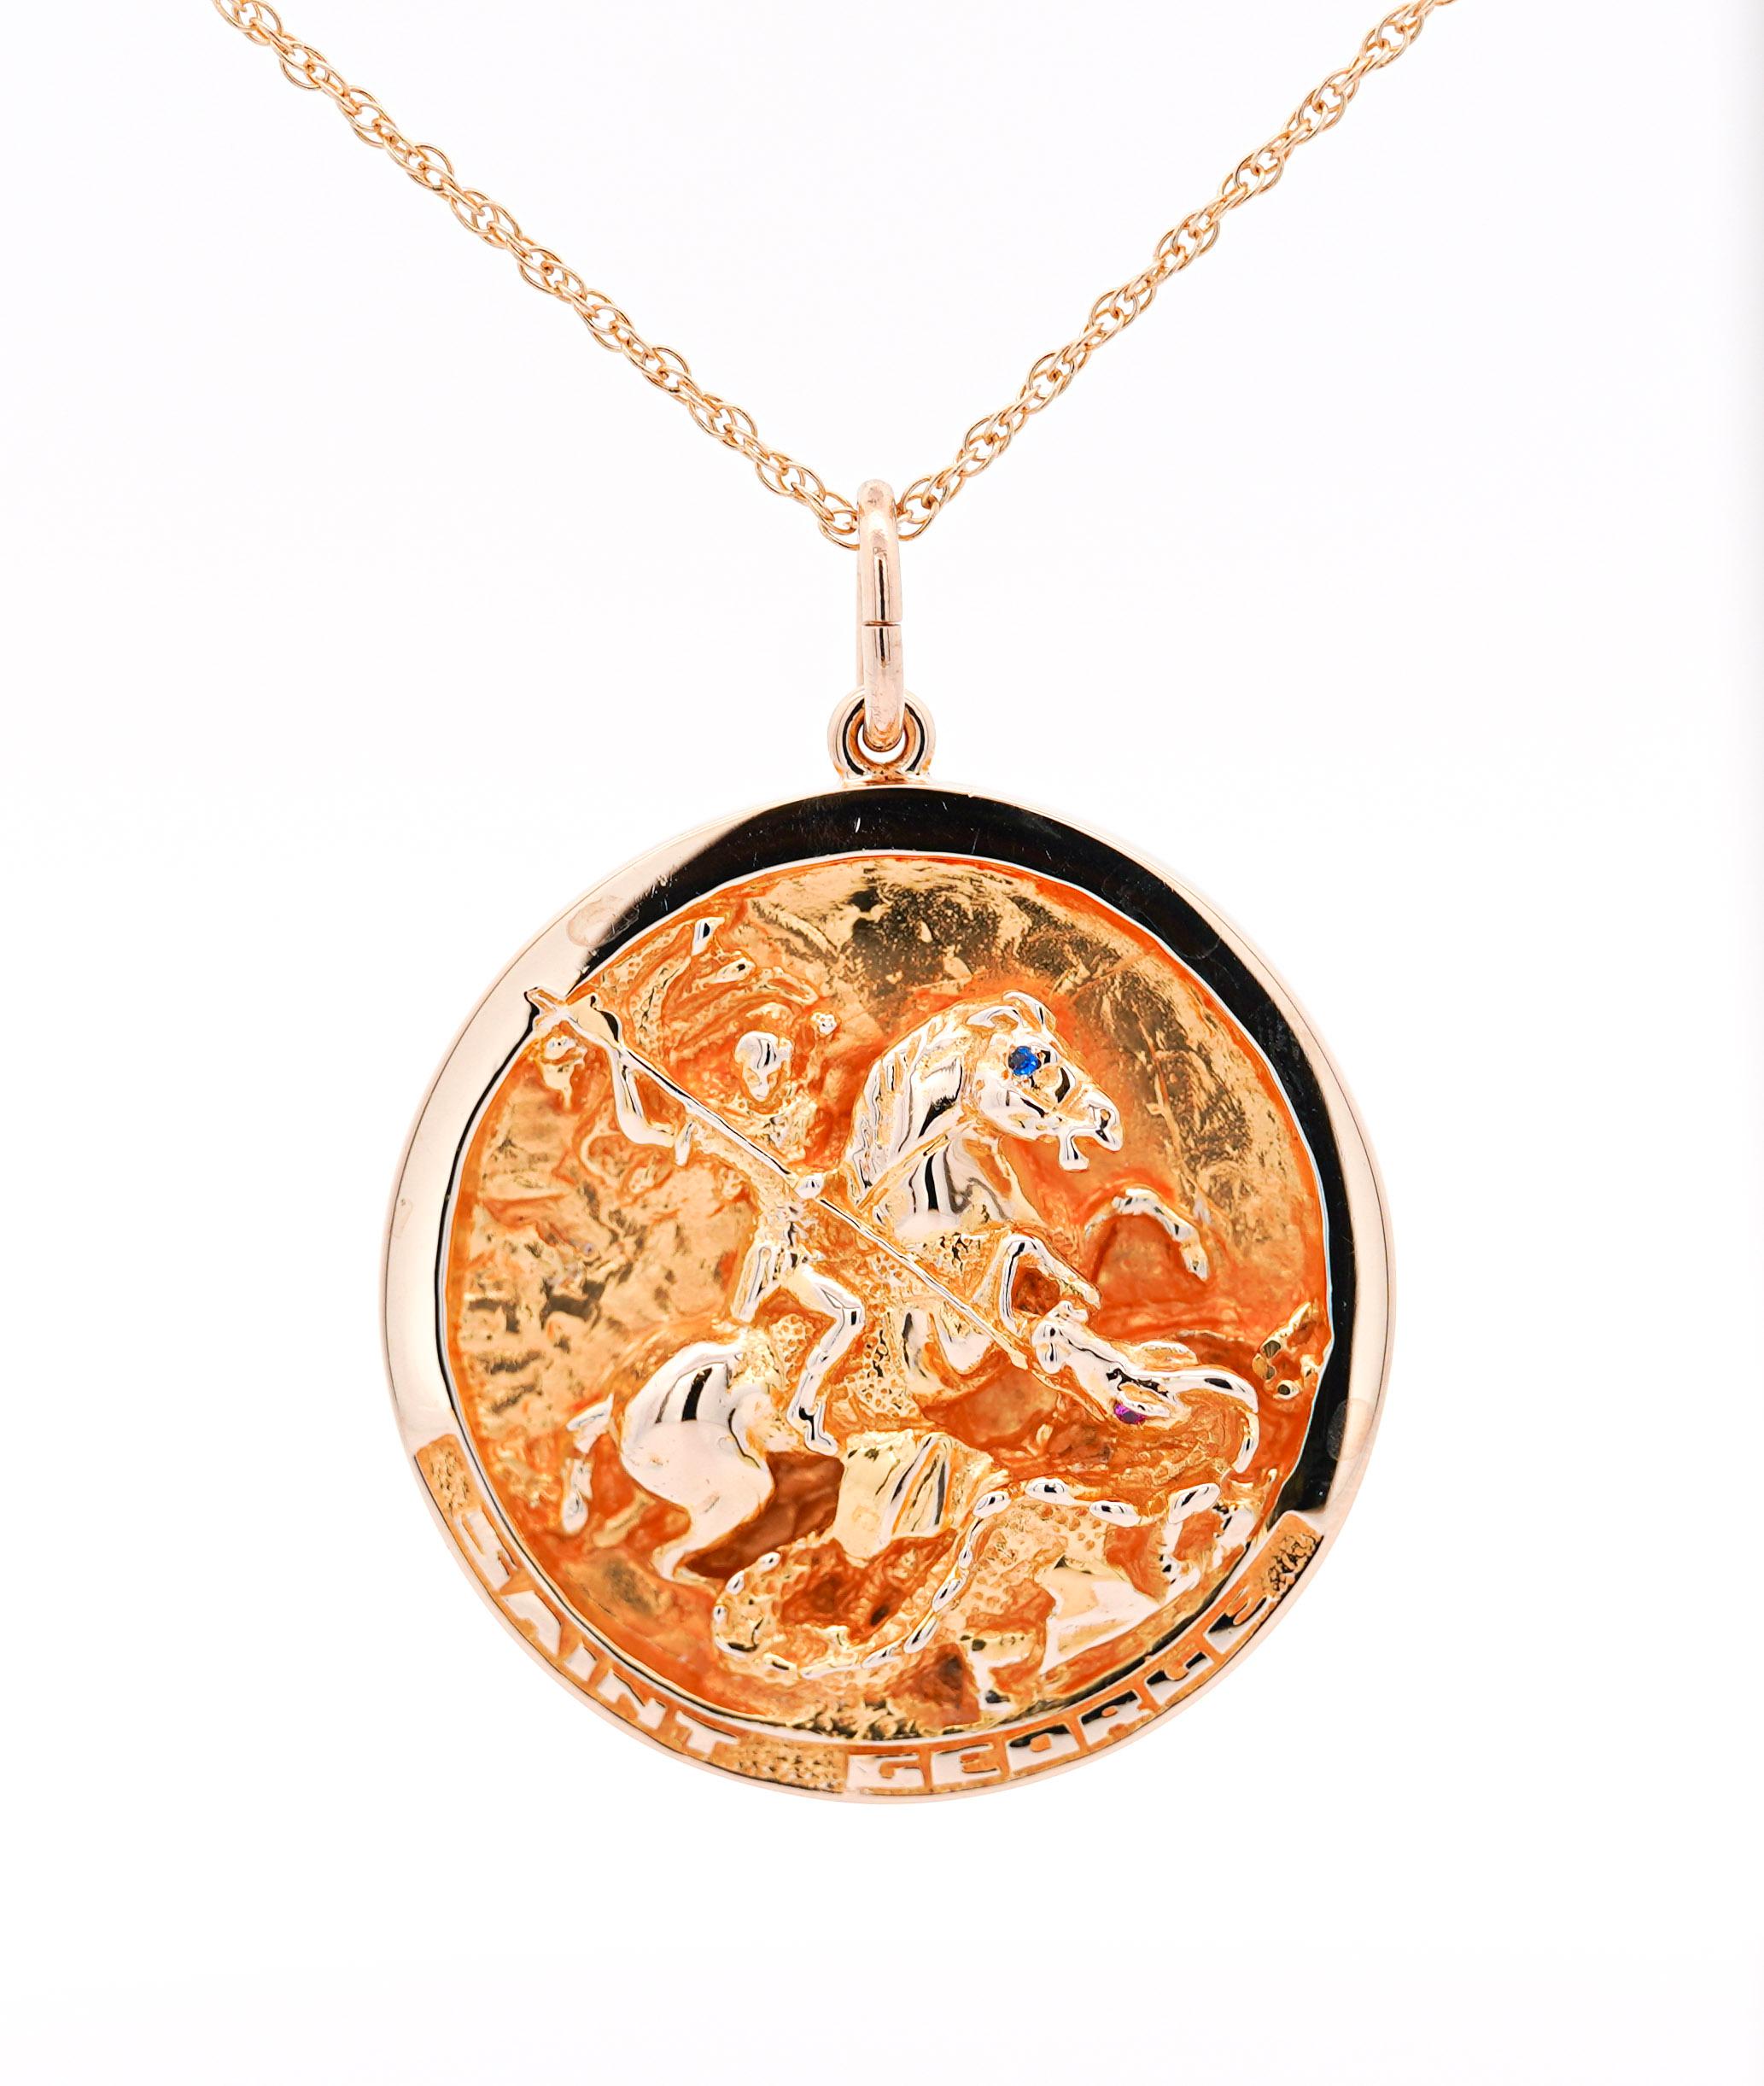 William Ruser signed 14k solid yellow gold medallion pendants. order comes as a set of three. Each having its own distinct carving. Saint George and Our Lady Of Fatima have a round cut blue sapphire set of eyes.

Featuring Saint George Slaying